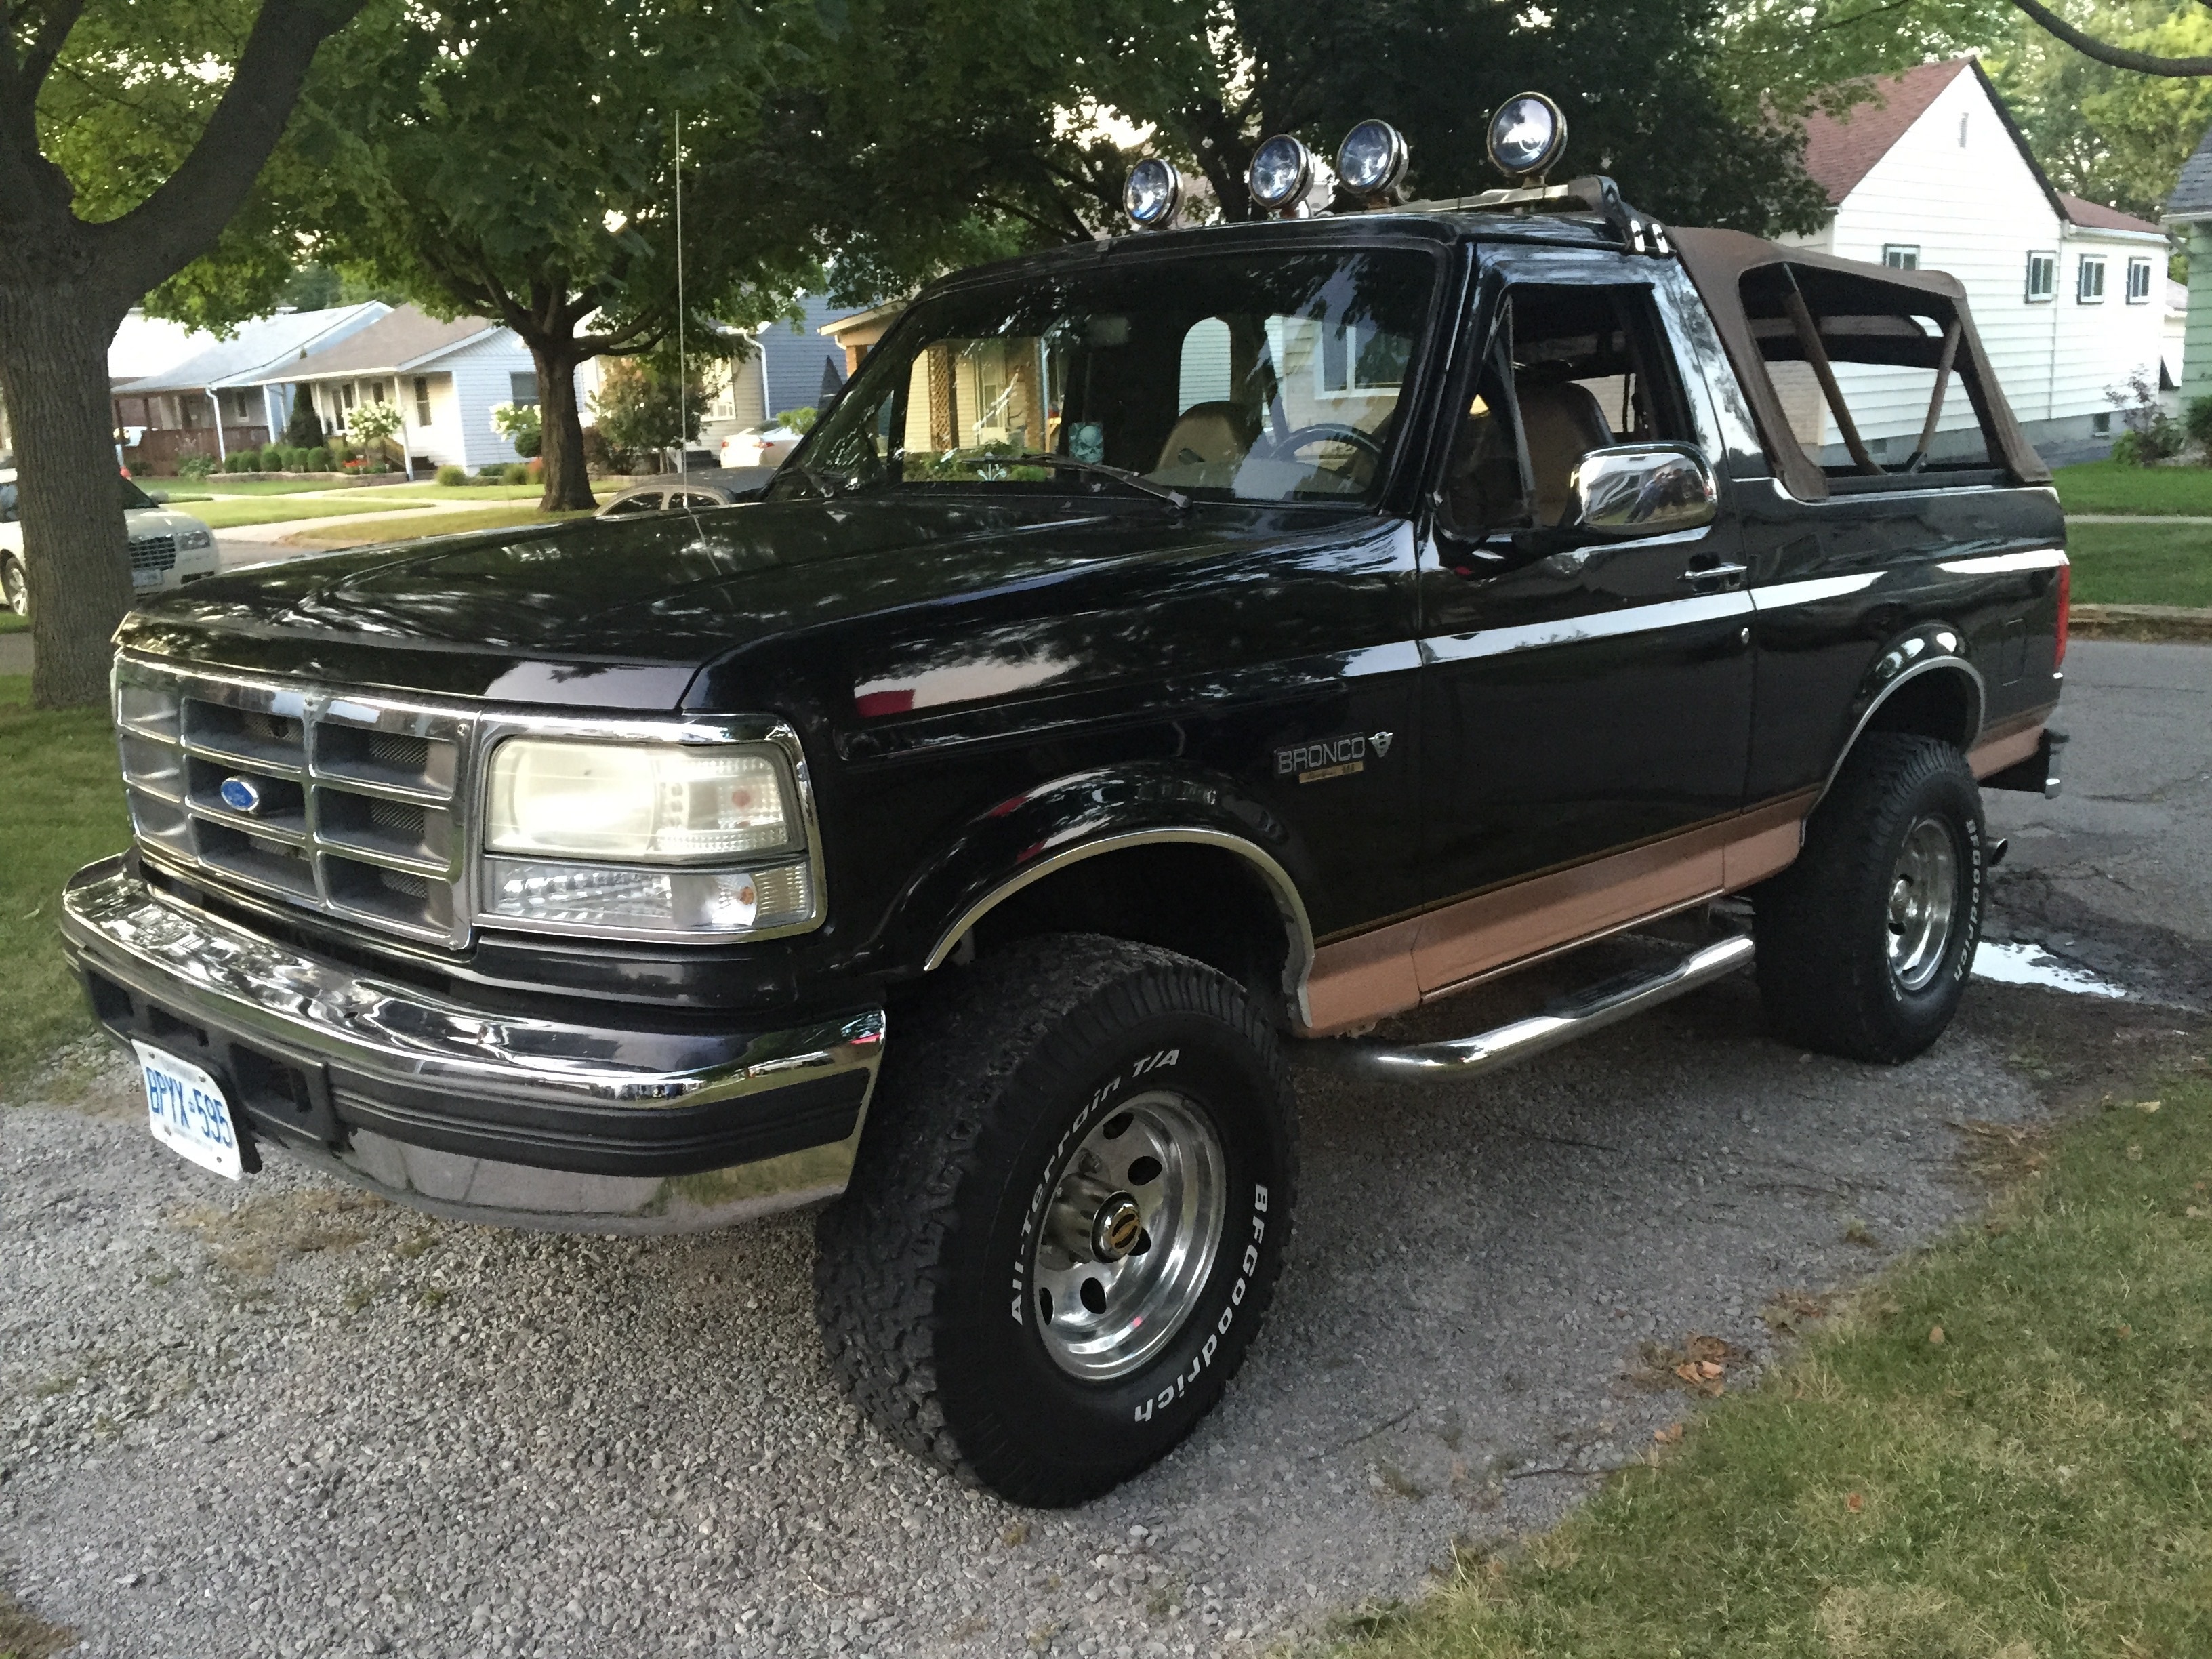 black Ford Bronco parked near brown tree